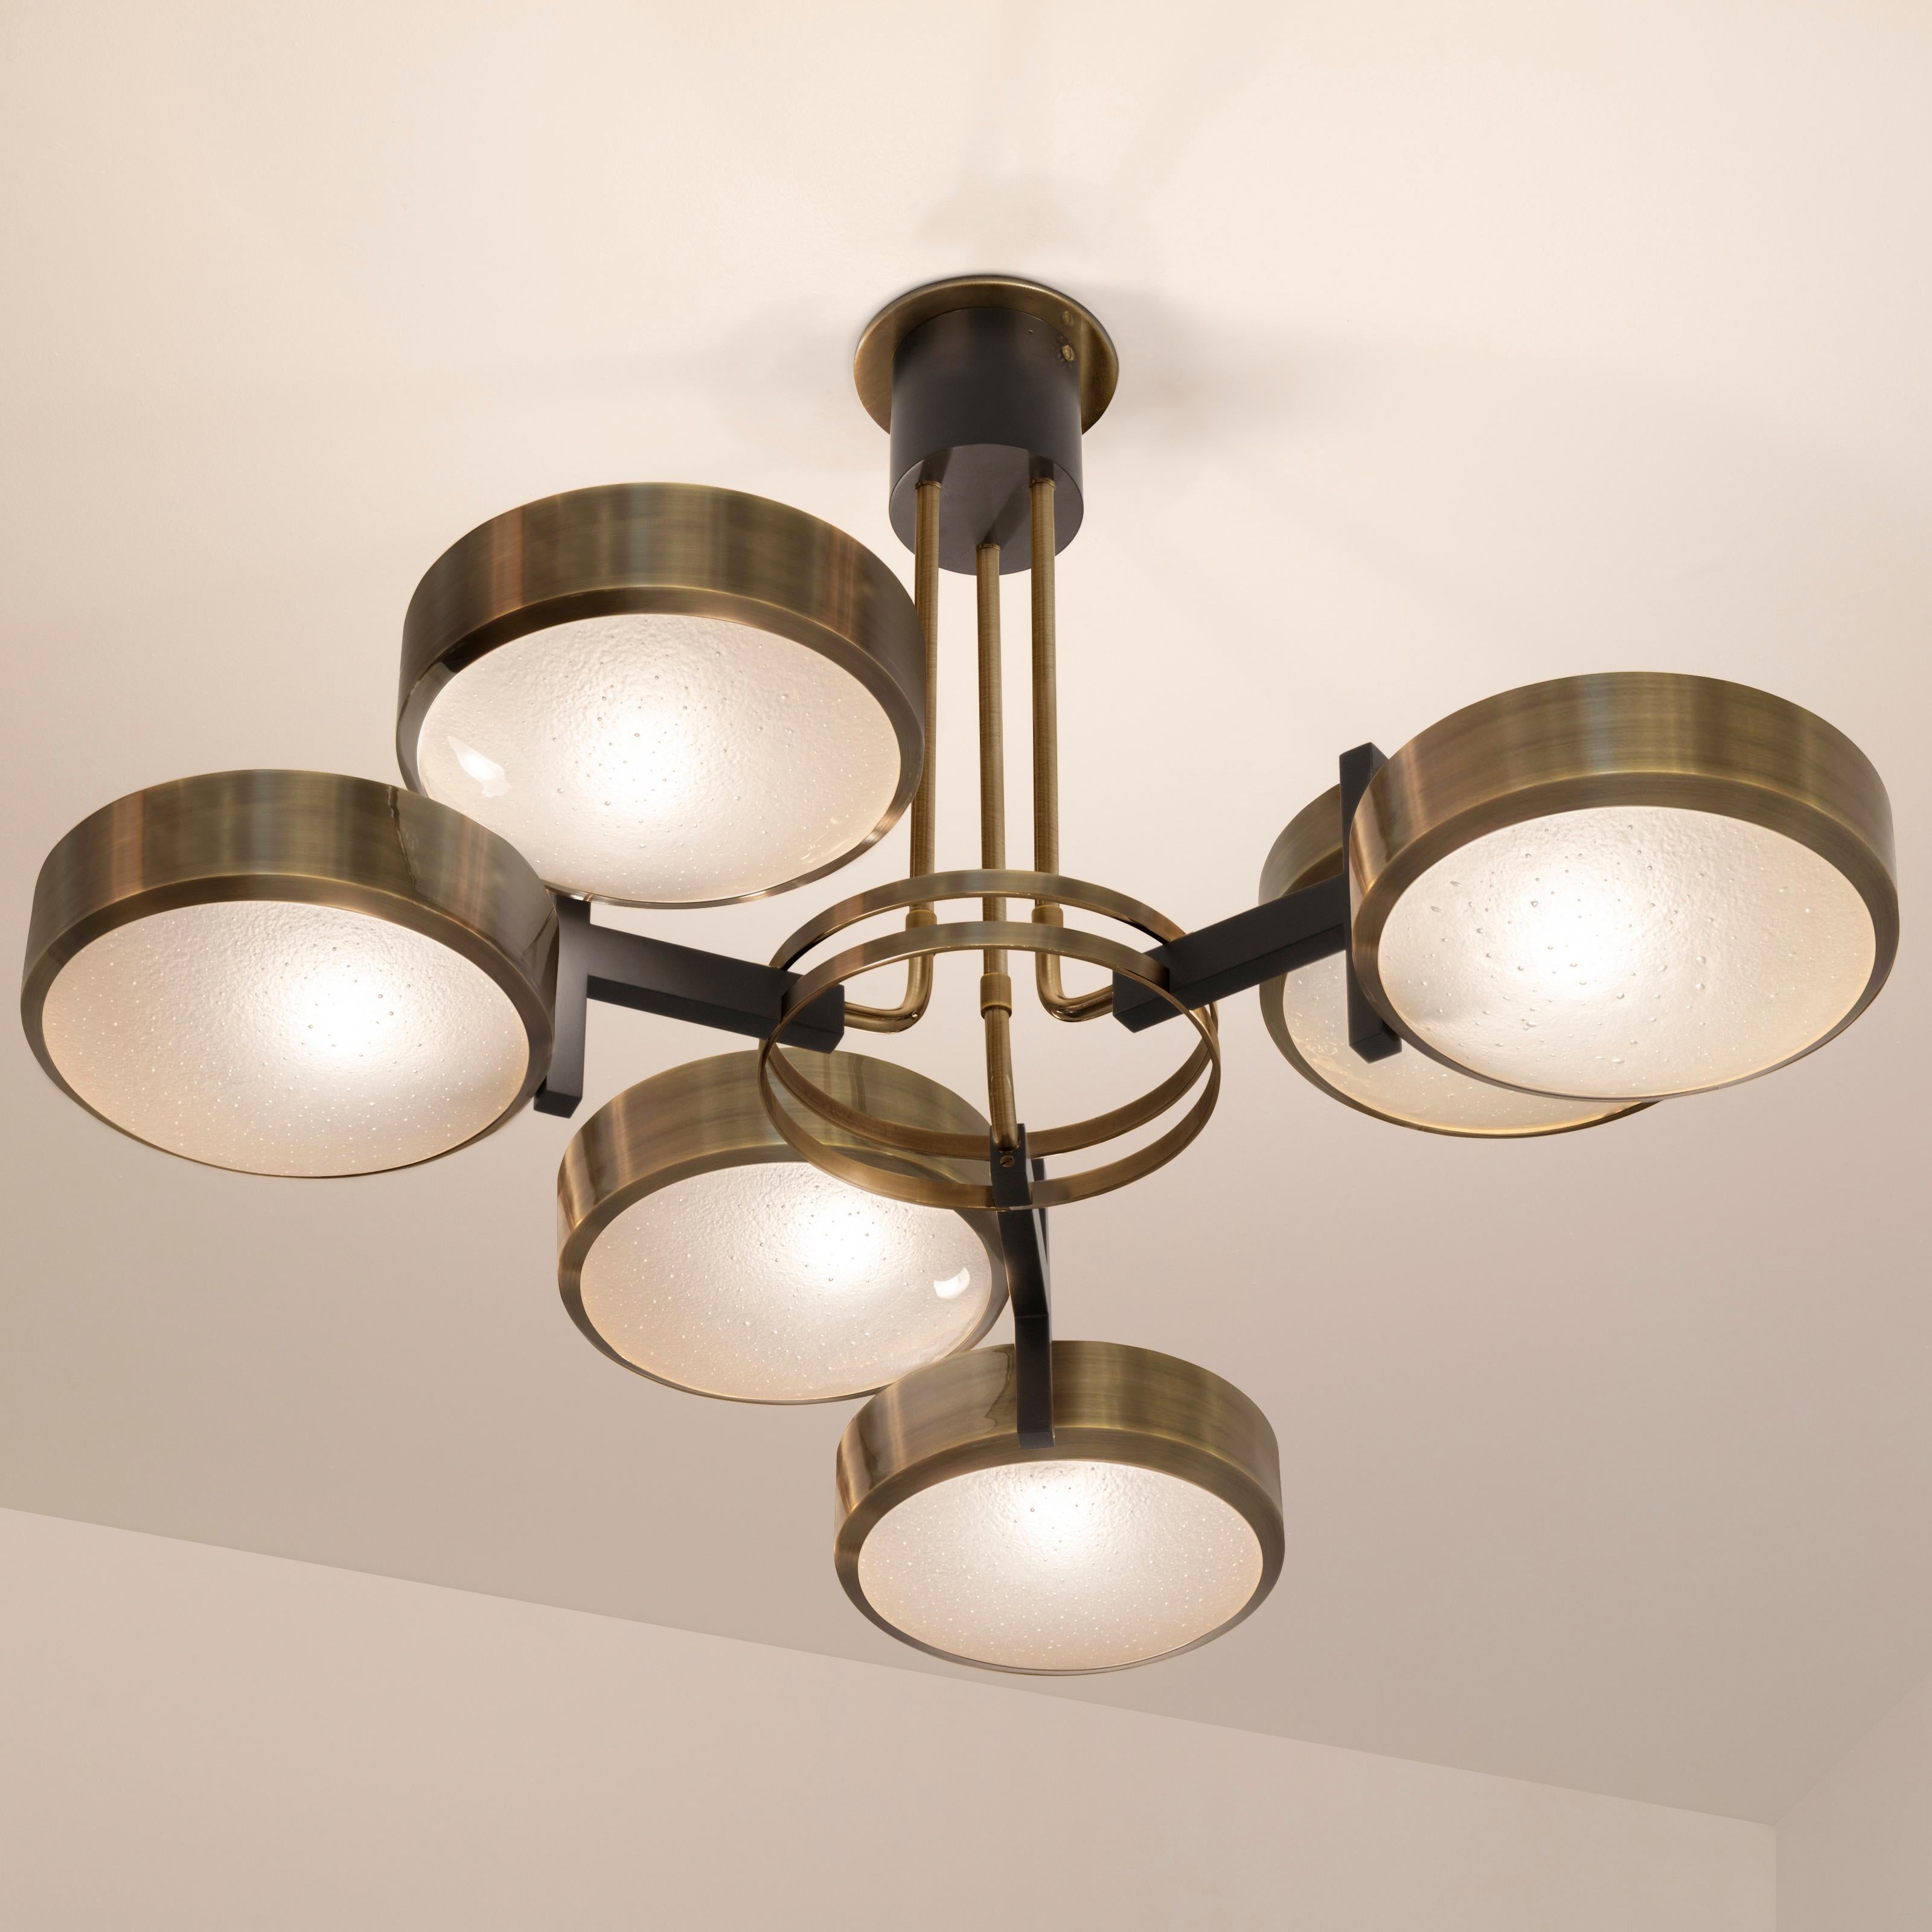 Eclissi Ceiling Light by Gaspare Asaro- Satin Brass and Satin Nickel Finish For Sale 2